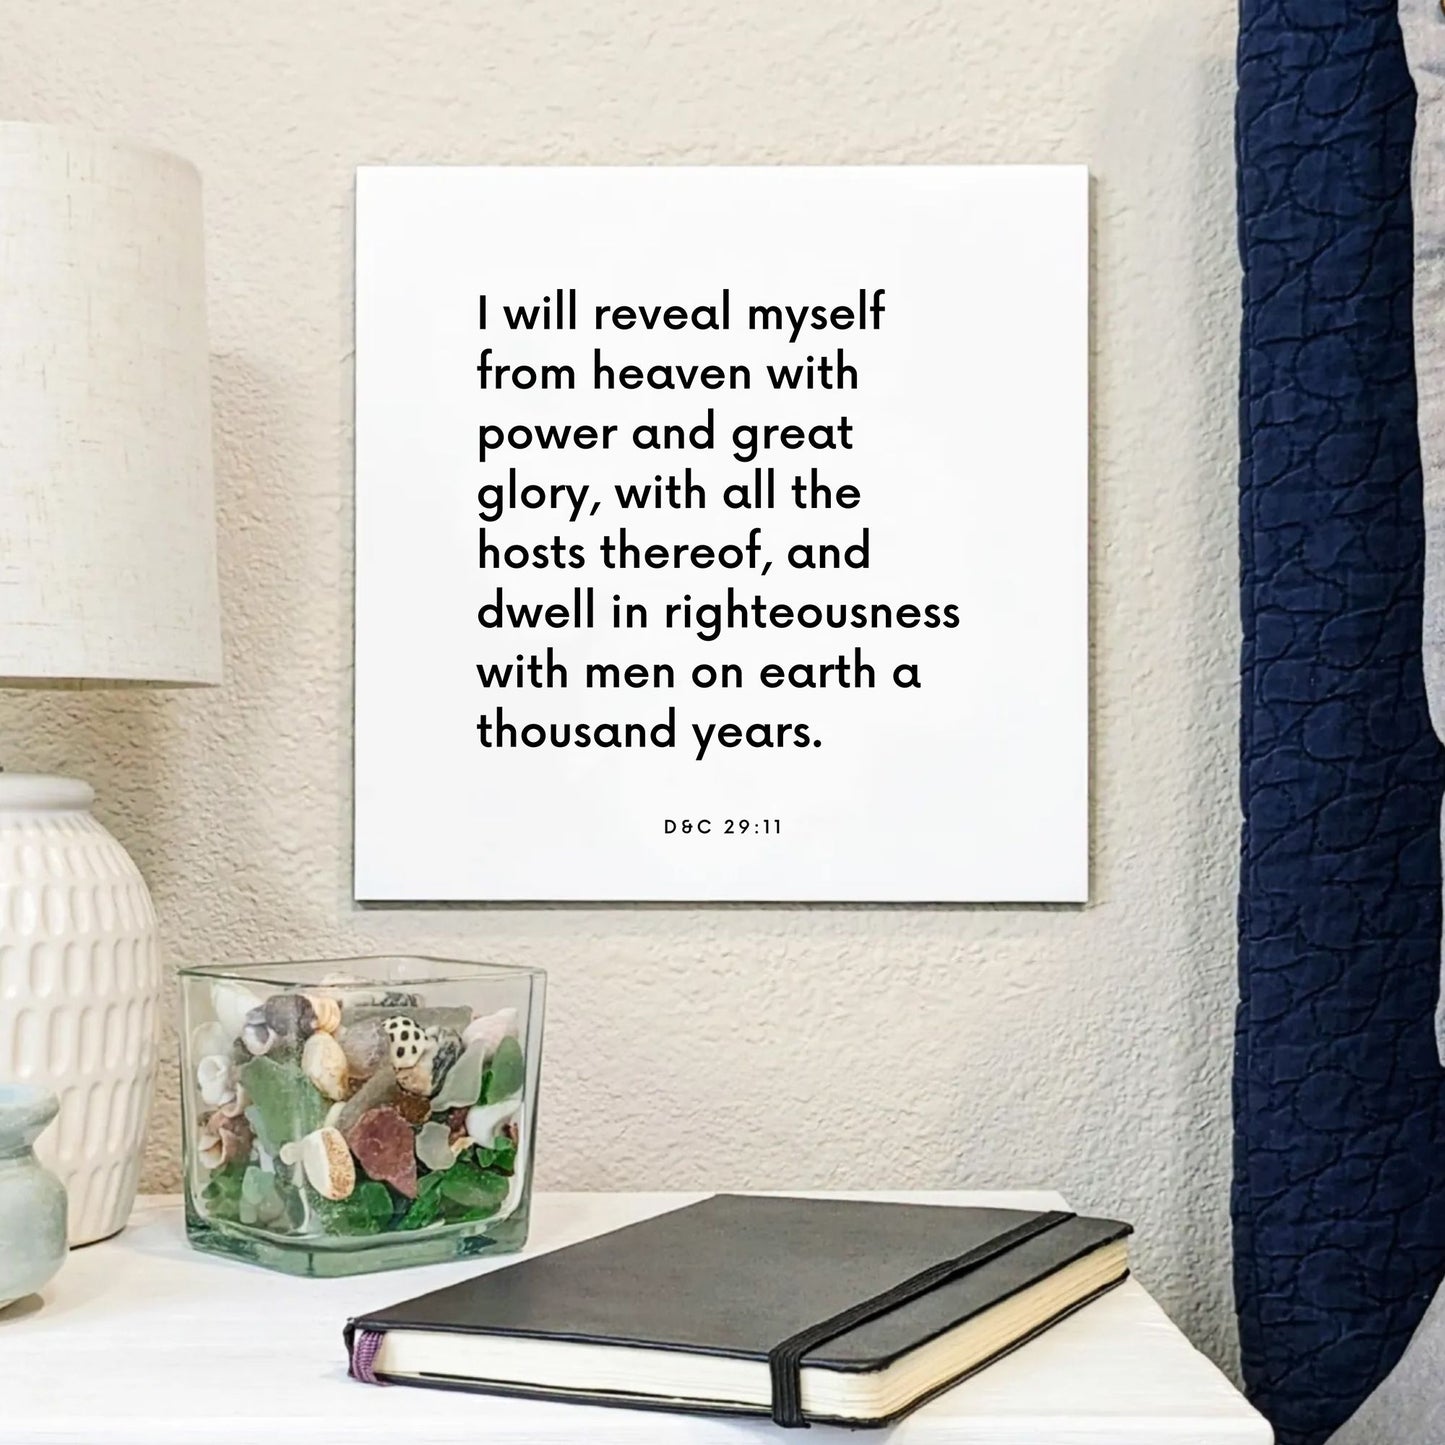 Bedside mouting of the scripture tile for D&C 29:11 - "I will reveal myself from heaven"